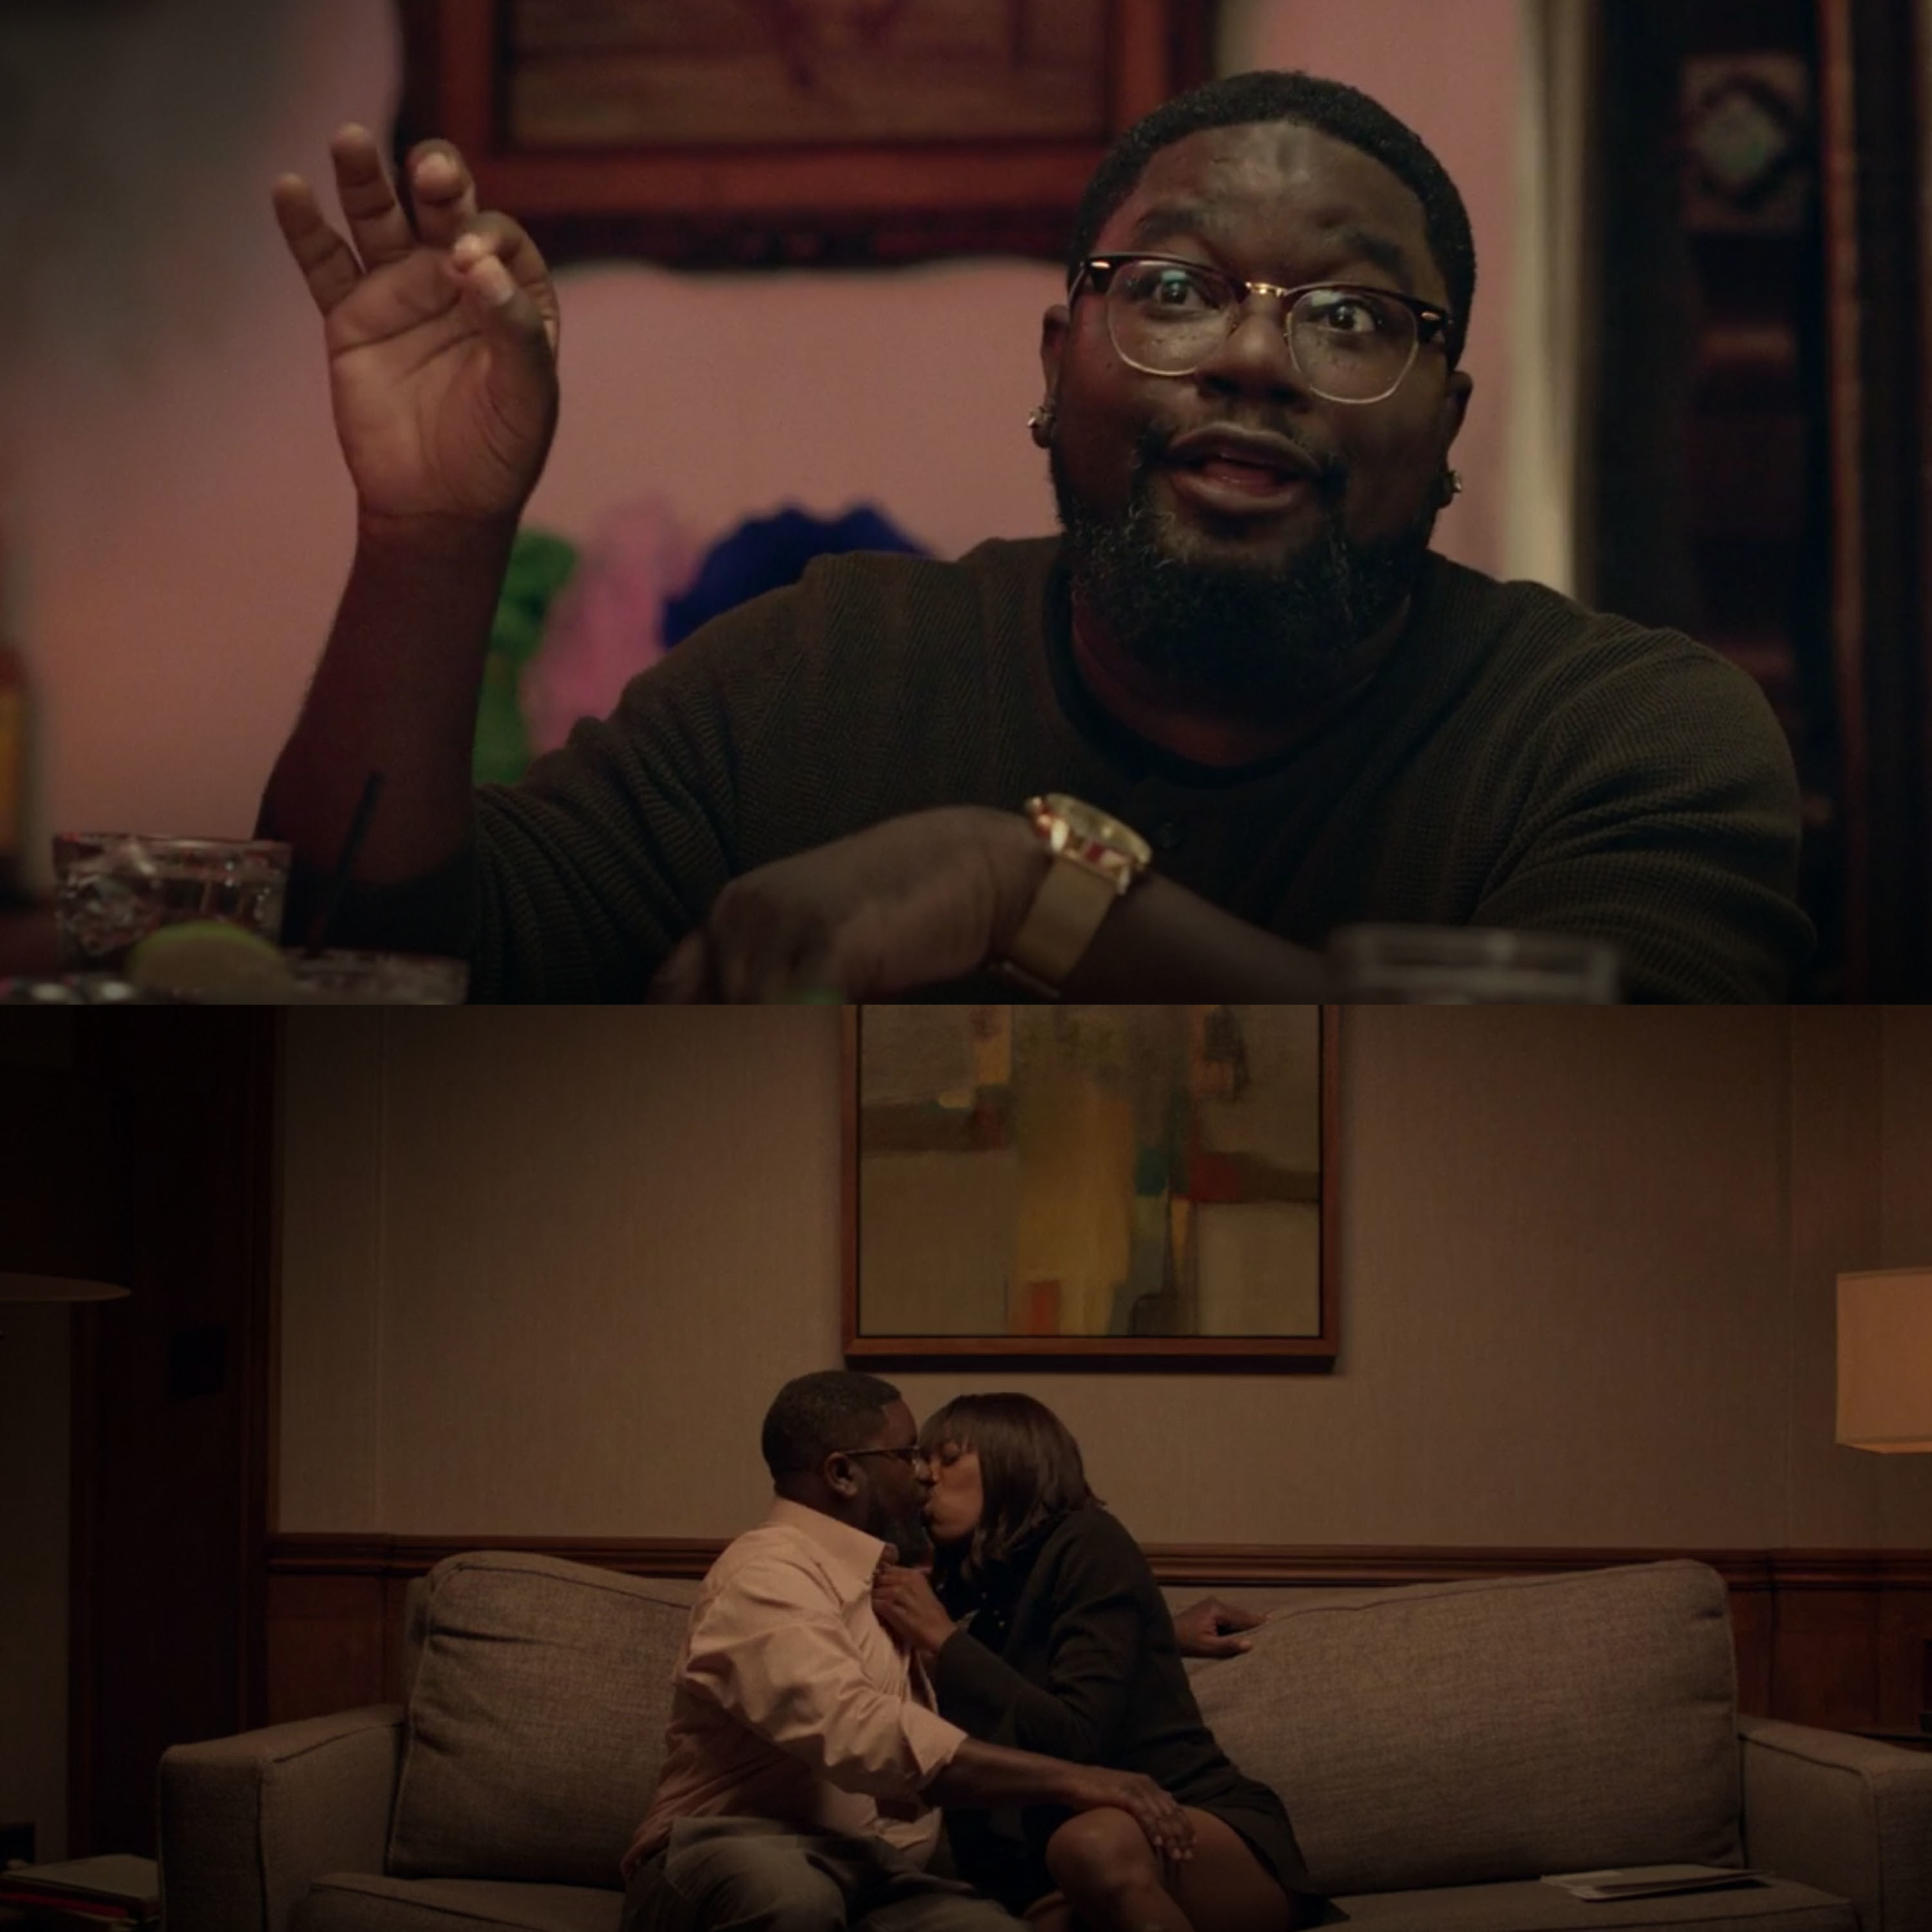 Lil Rey Howery as Quentin jokes with Molly and later hooks up with her on the couch in his office in &quot;Insecure&quot;